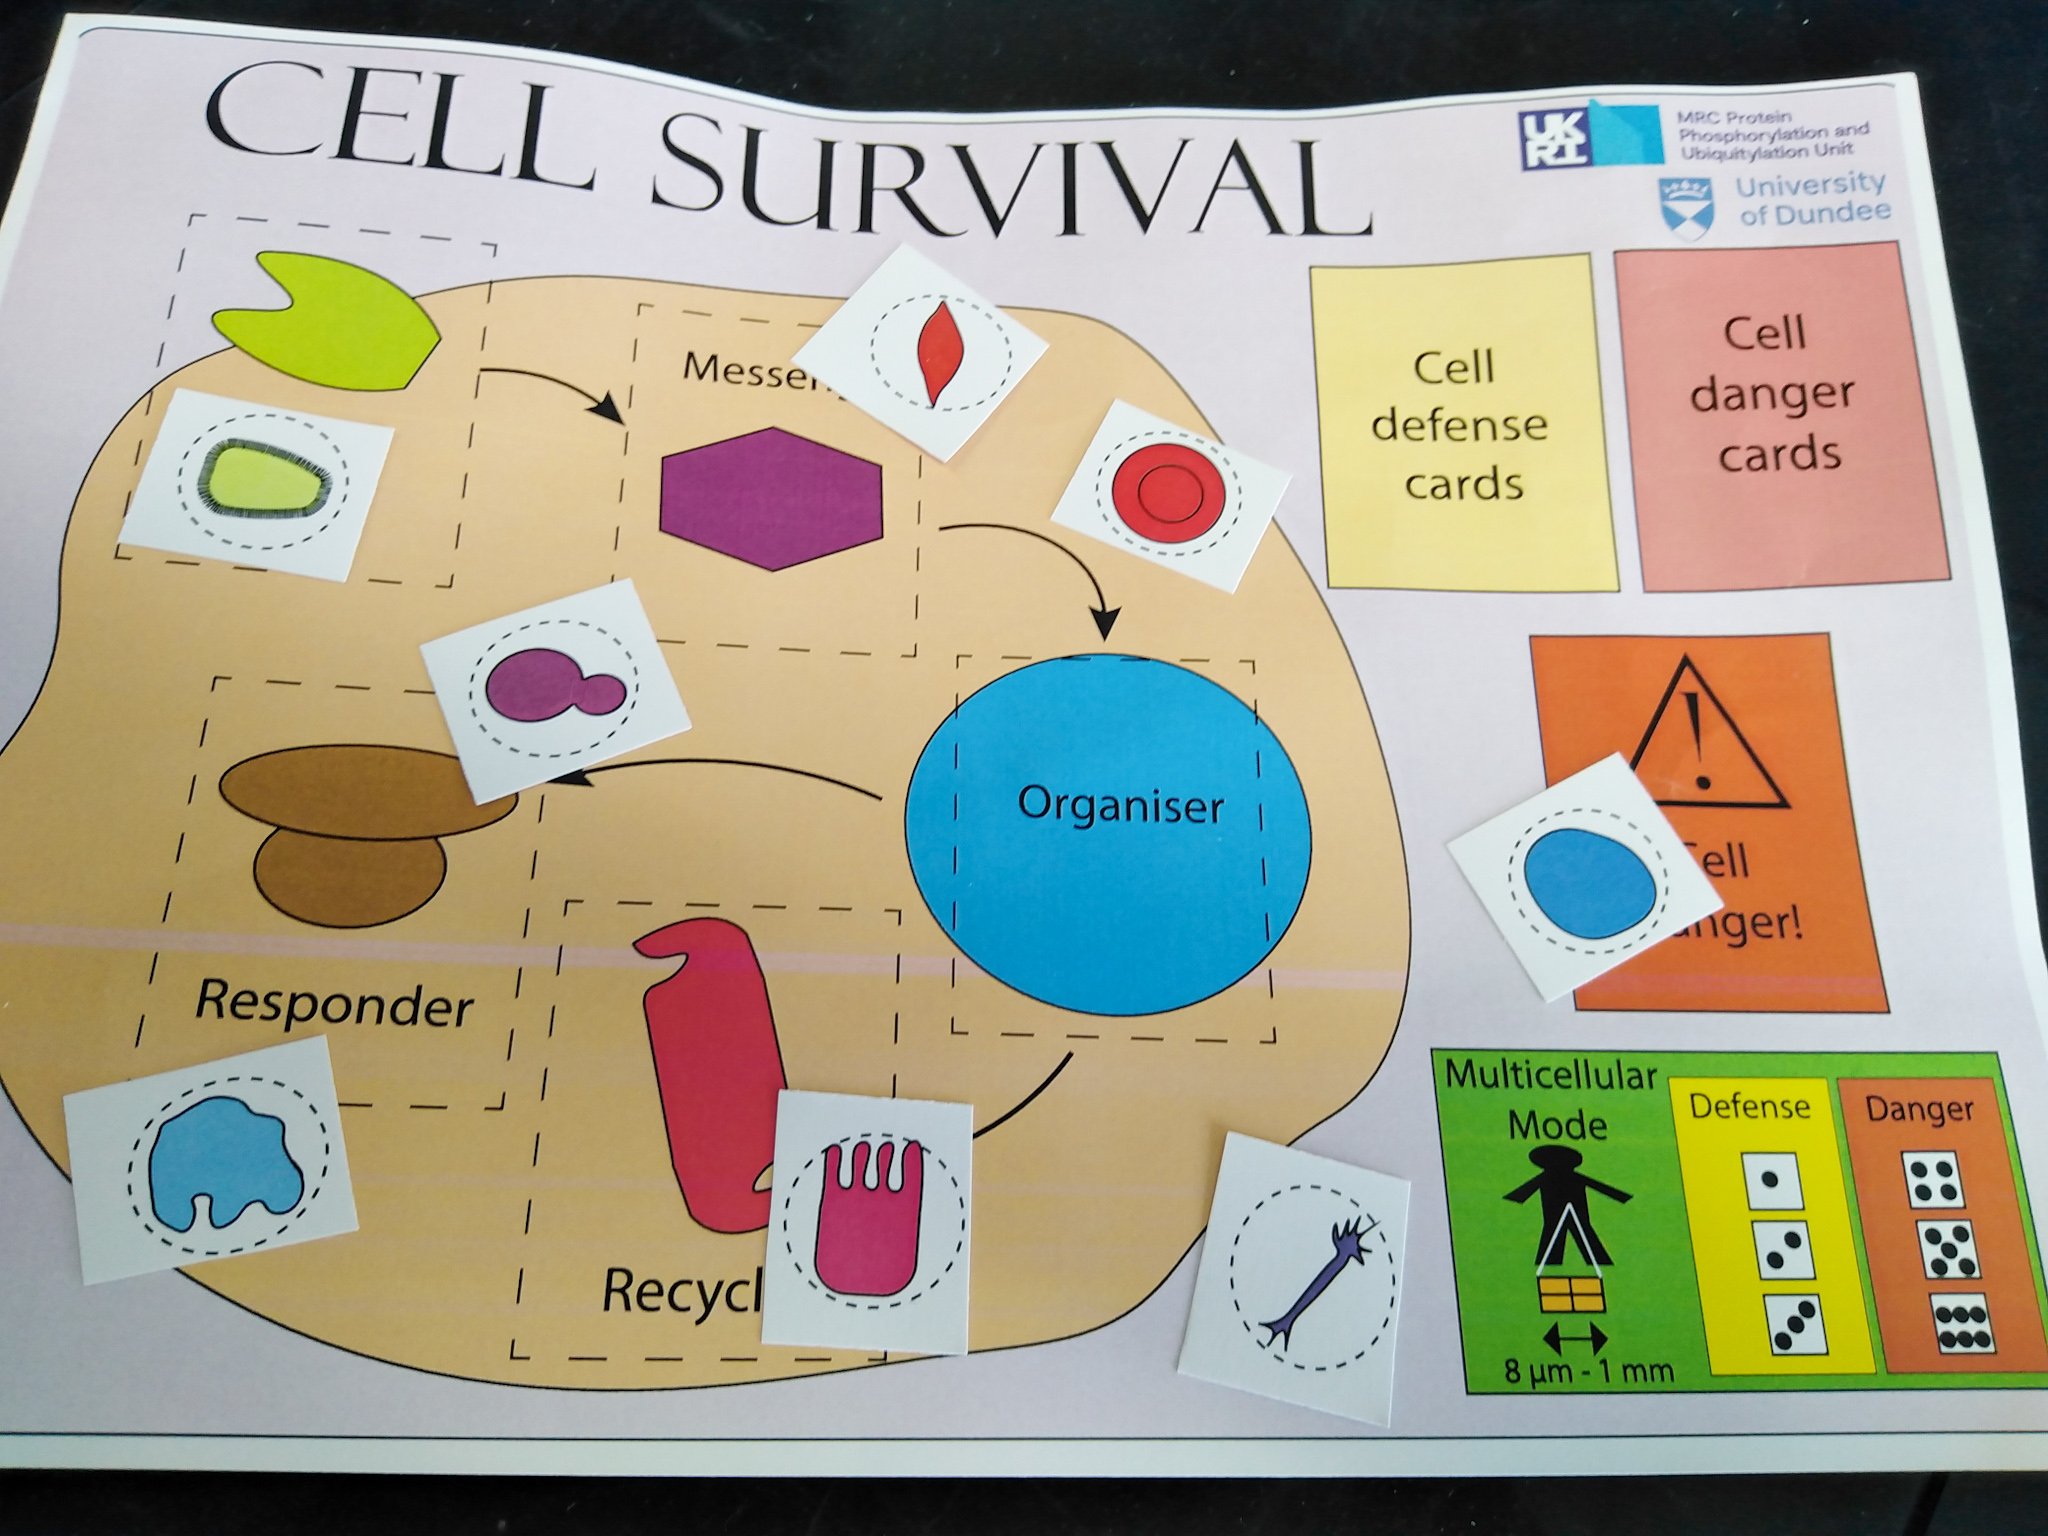 Cell survival